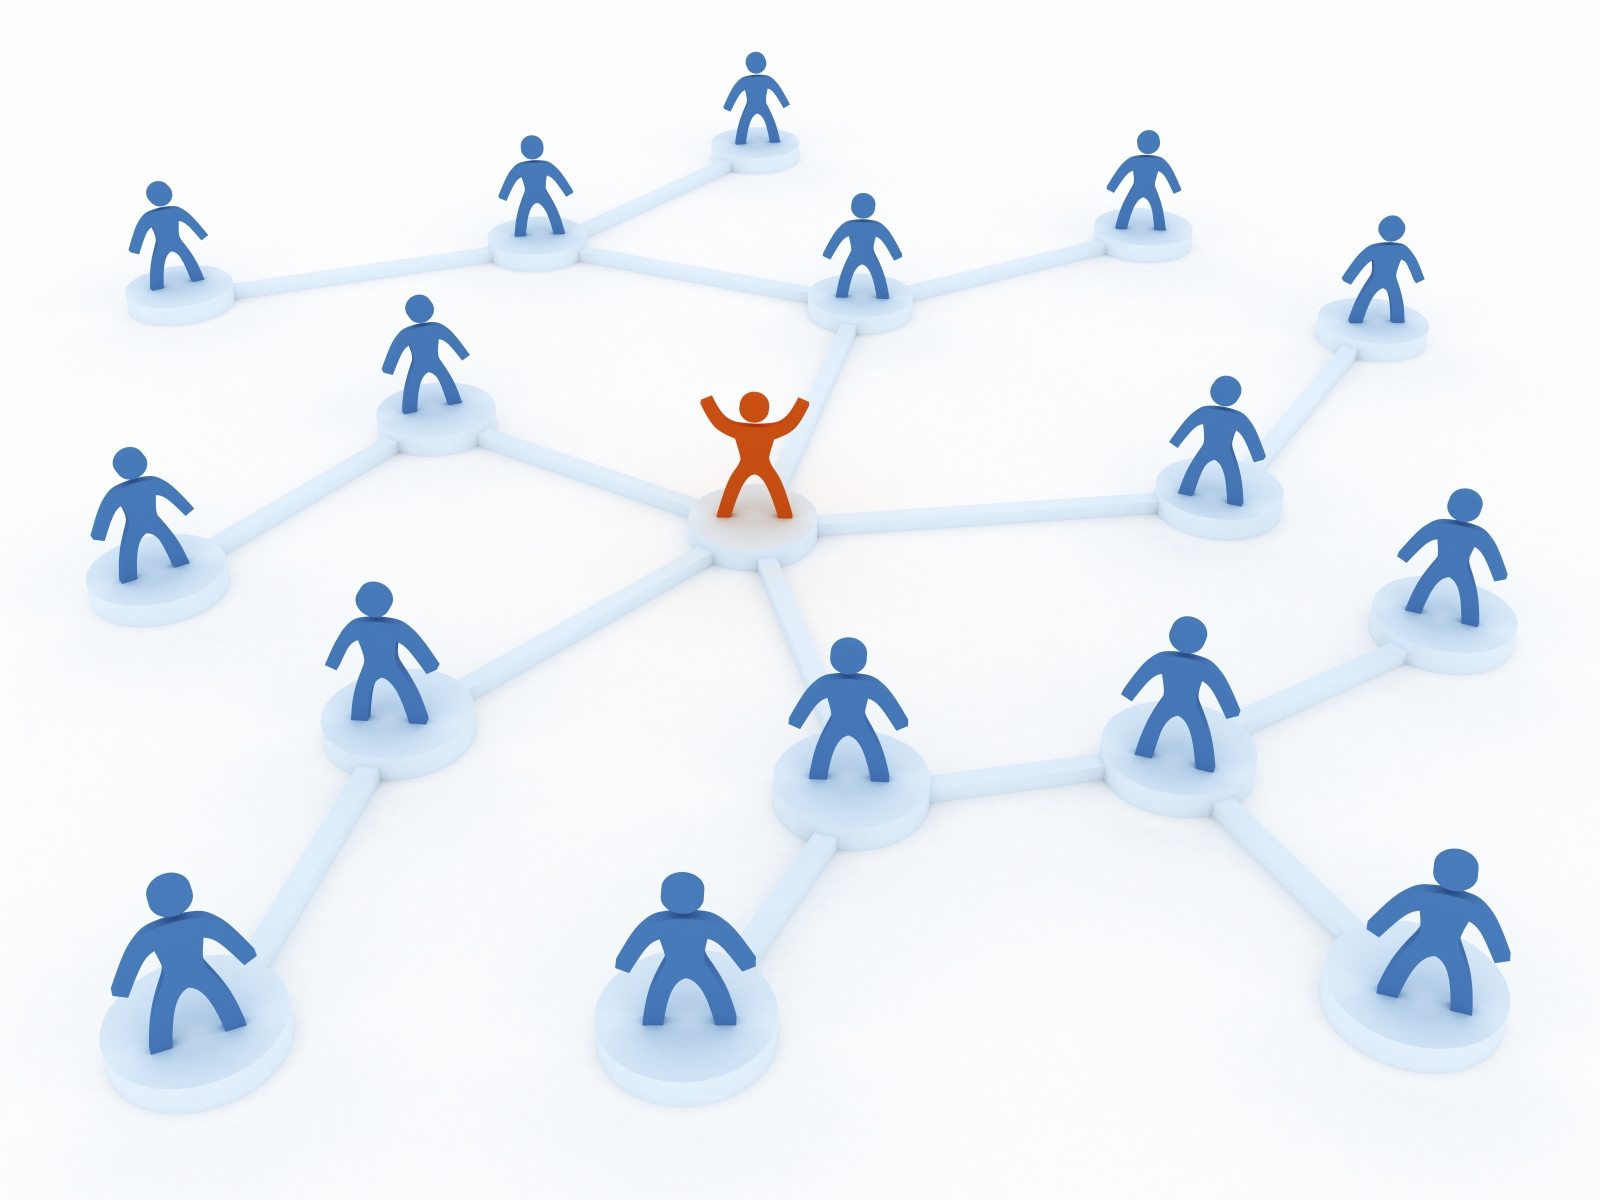 Linkbuilding Strategies: What Works for You